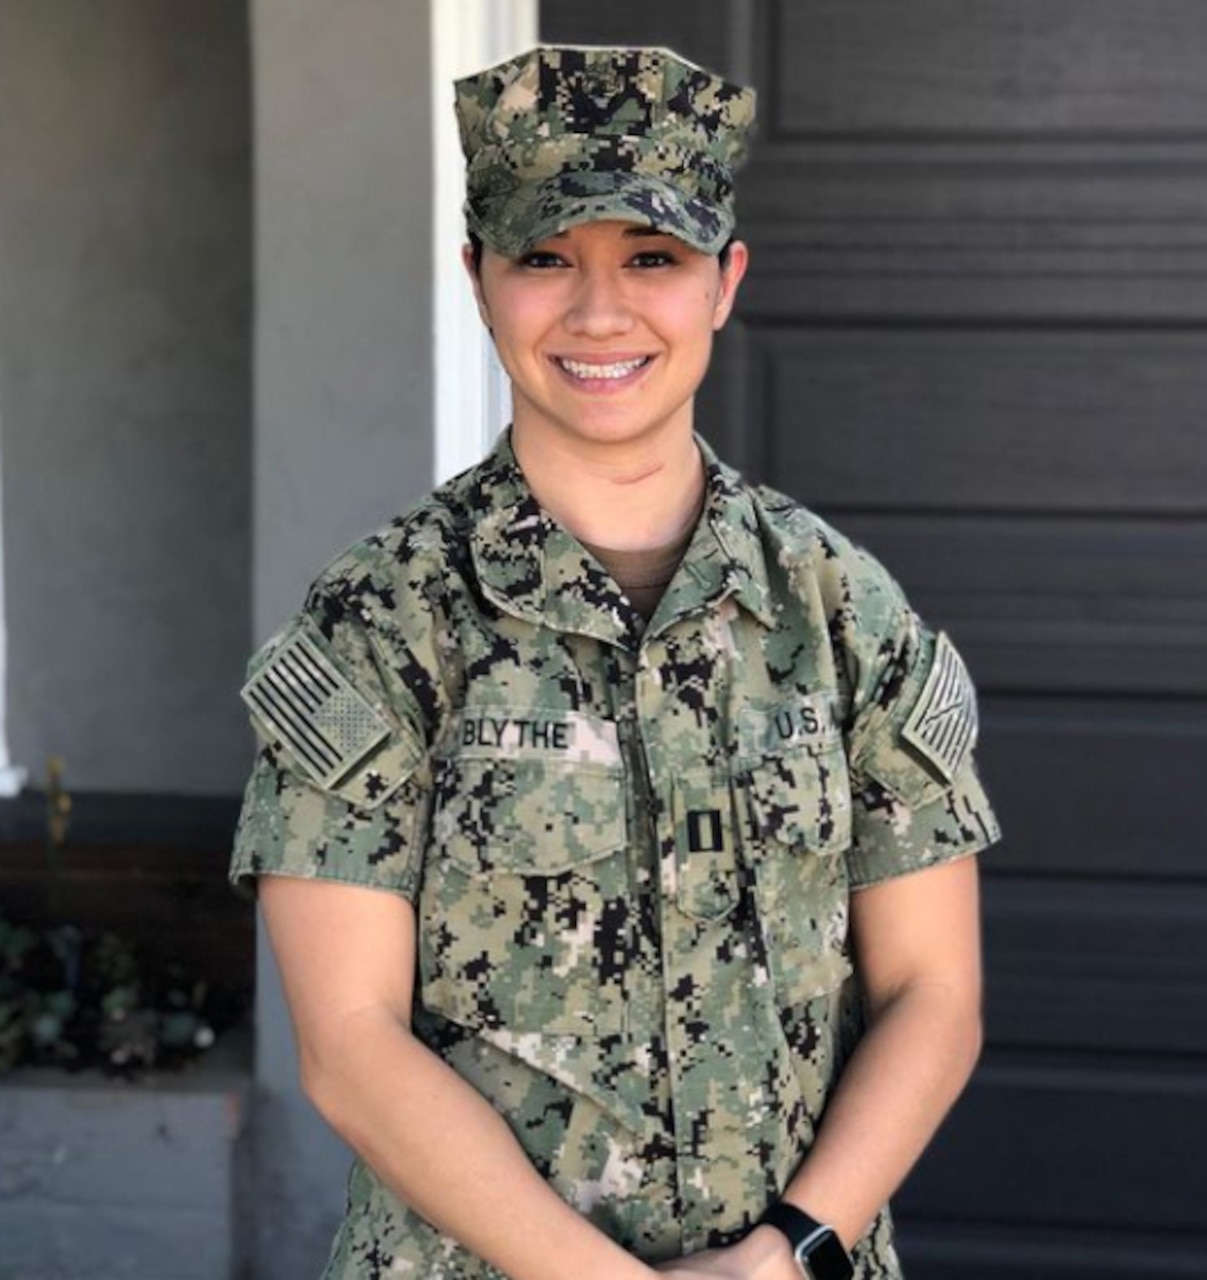 A woman in a Navy uniform poses for a photo.